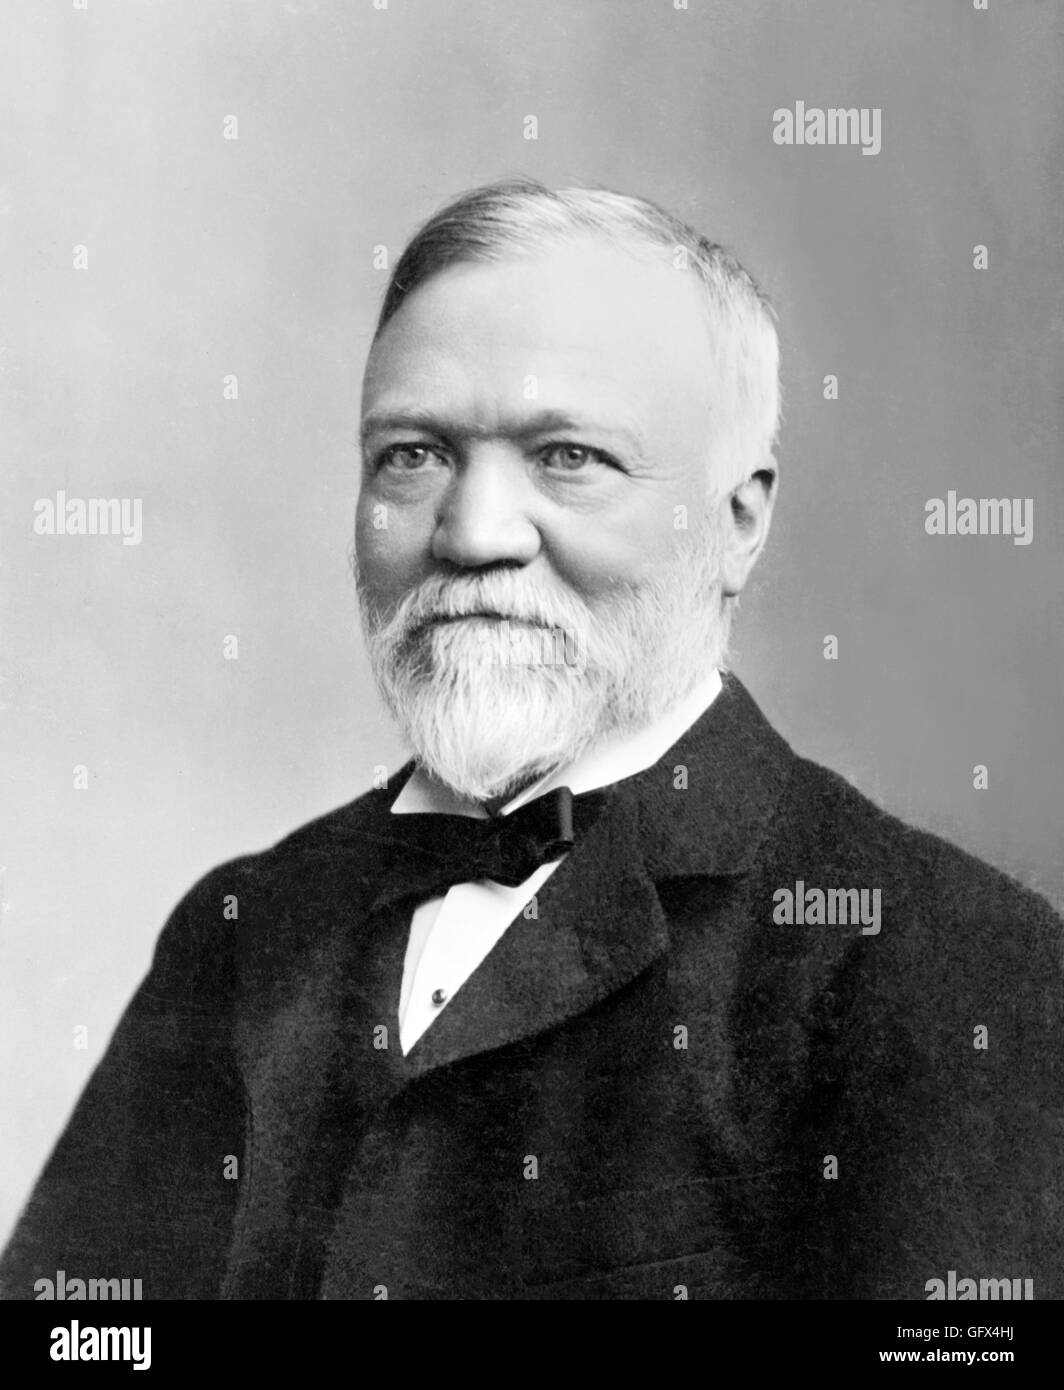 Andrew Carnegie (1835-1919), a Scottish-American industrialist, prominent in the American steel industry in the late 19th century. Portrait by B L H Dabbs, c.1896 Stock Photo